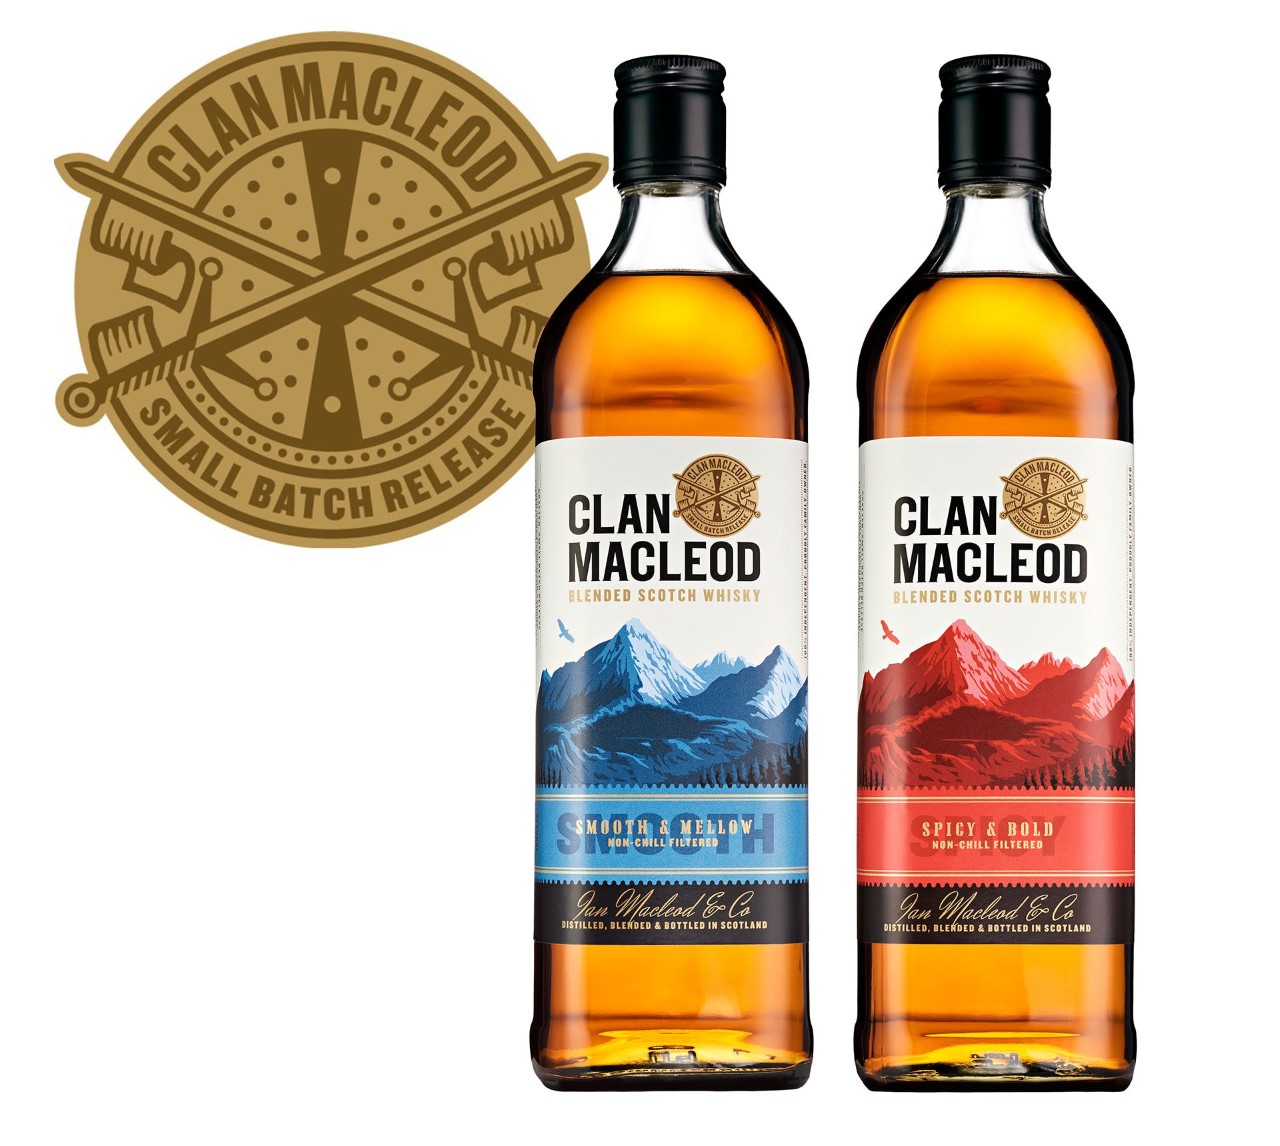 (The Clan Macleod release from Ian Macleod) Ian Macleod's broad range of products is set well to help them navigate financial turmoil